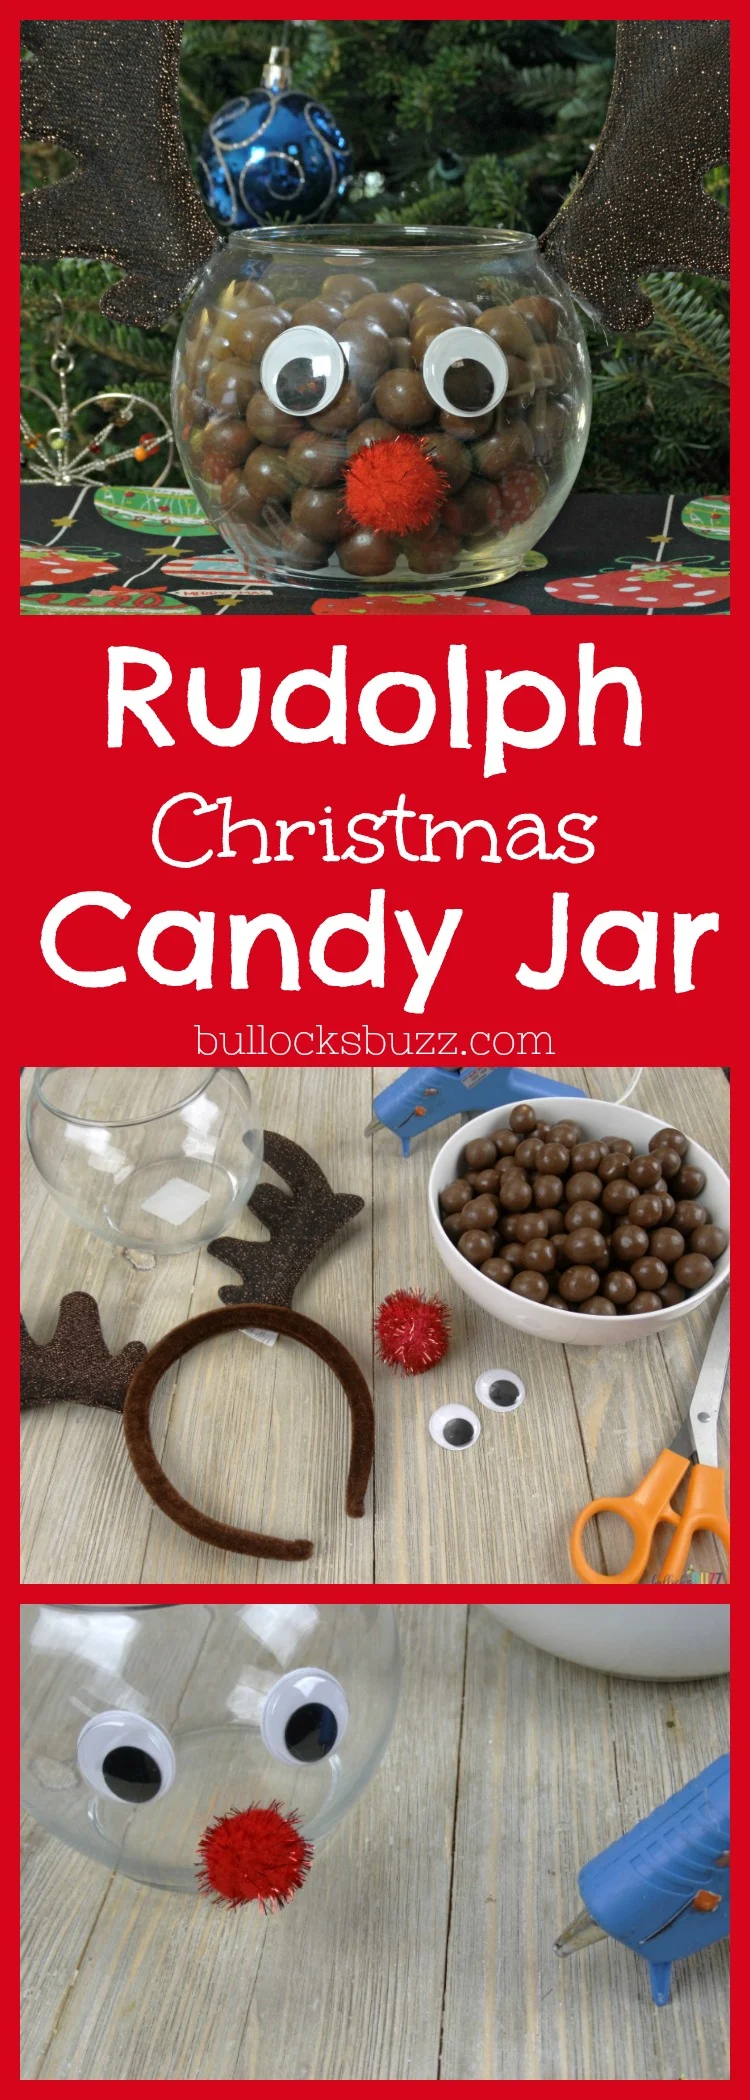 An adorable Rudolph Christmas Candy Jar that is filled with chocolate covered malt balls, takes just minutes to make and costs less than $5! It's the perfect addition to your holiday decor, or as part of a holiday candy bar, and even makes a sweet little gift!